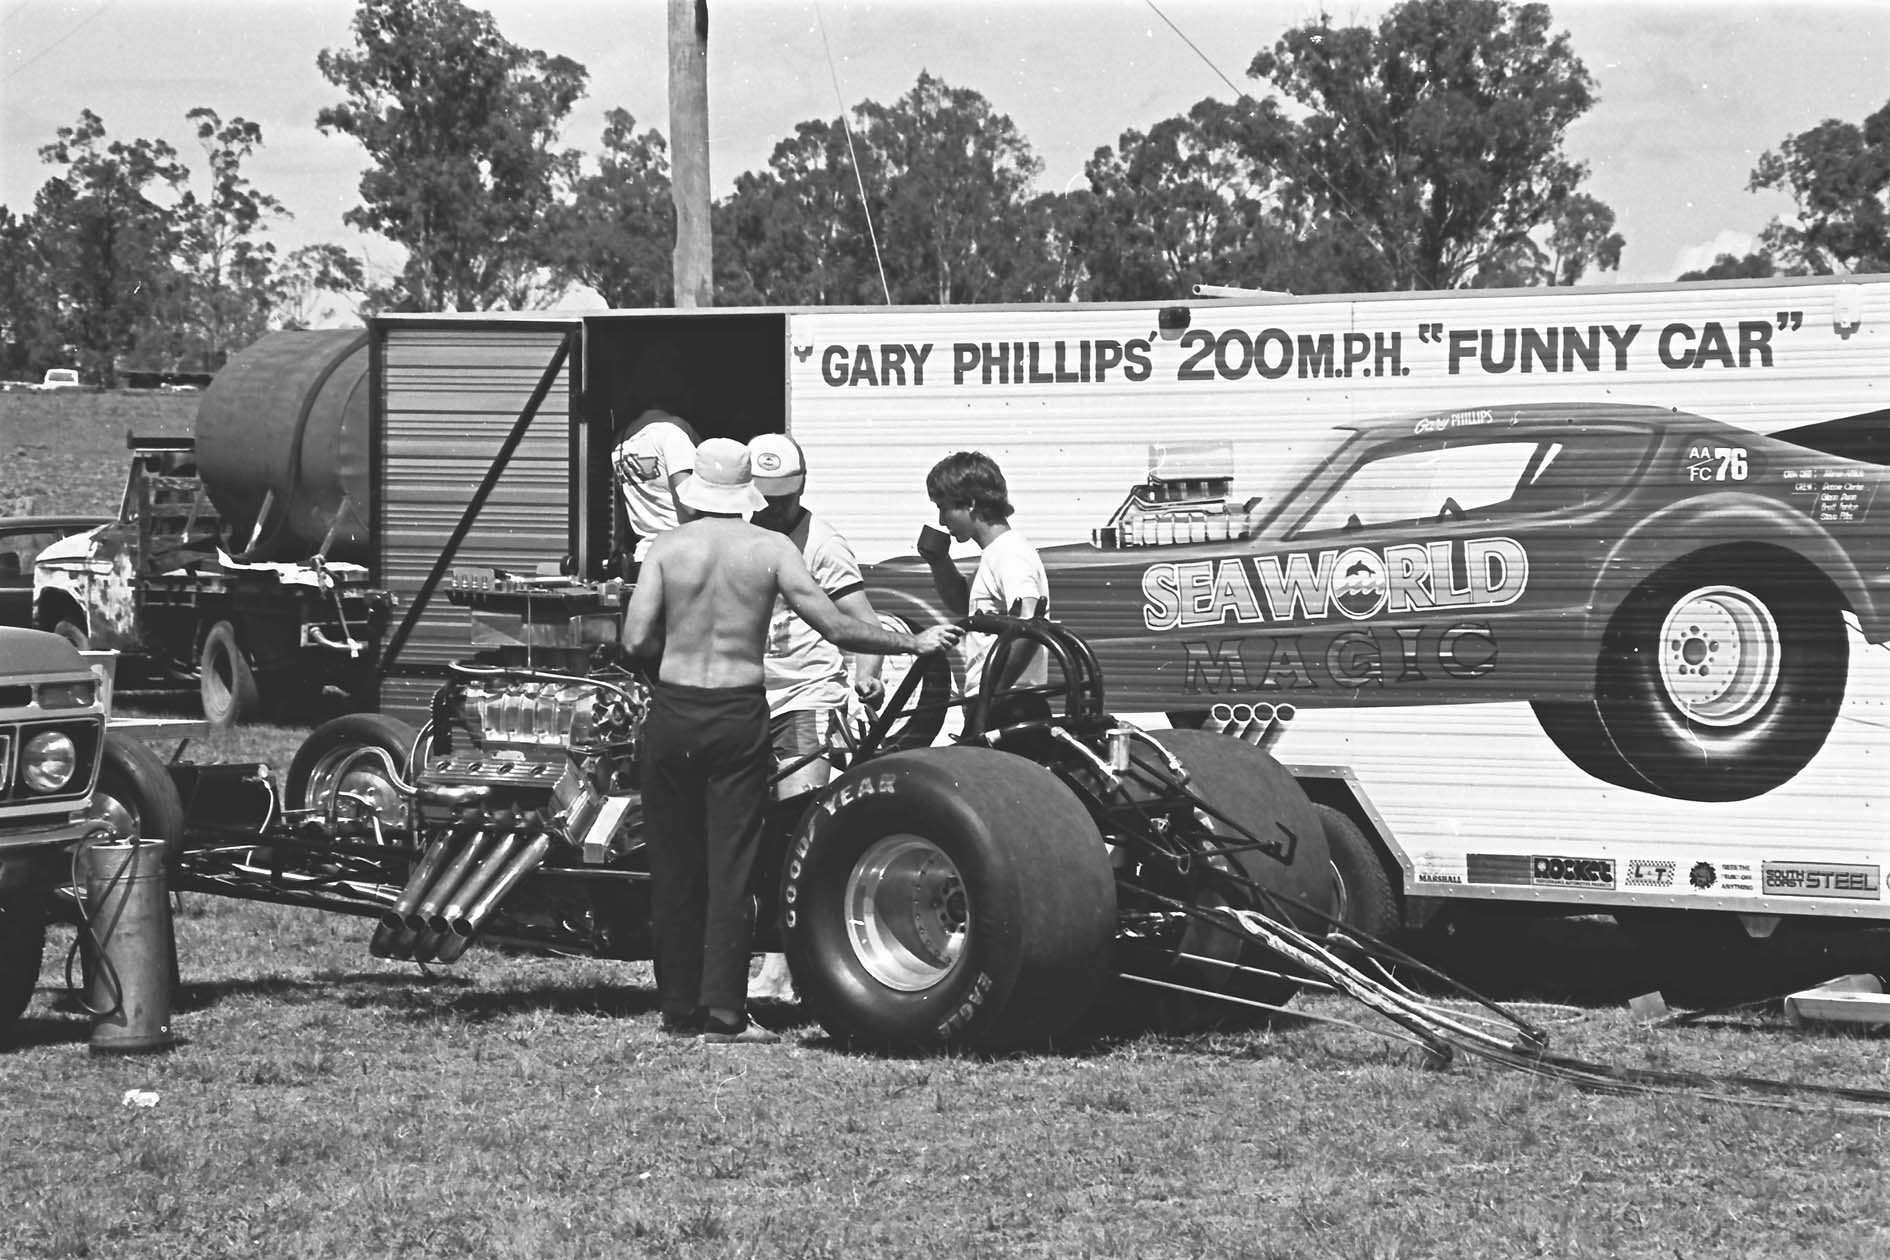 Gary Phillips in the 1980s, he still races today.